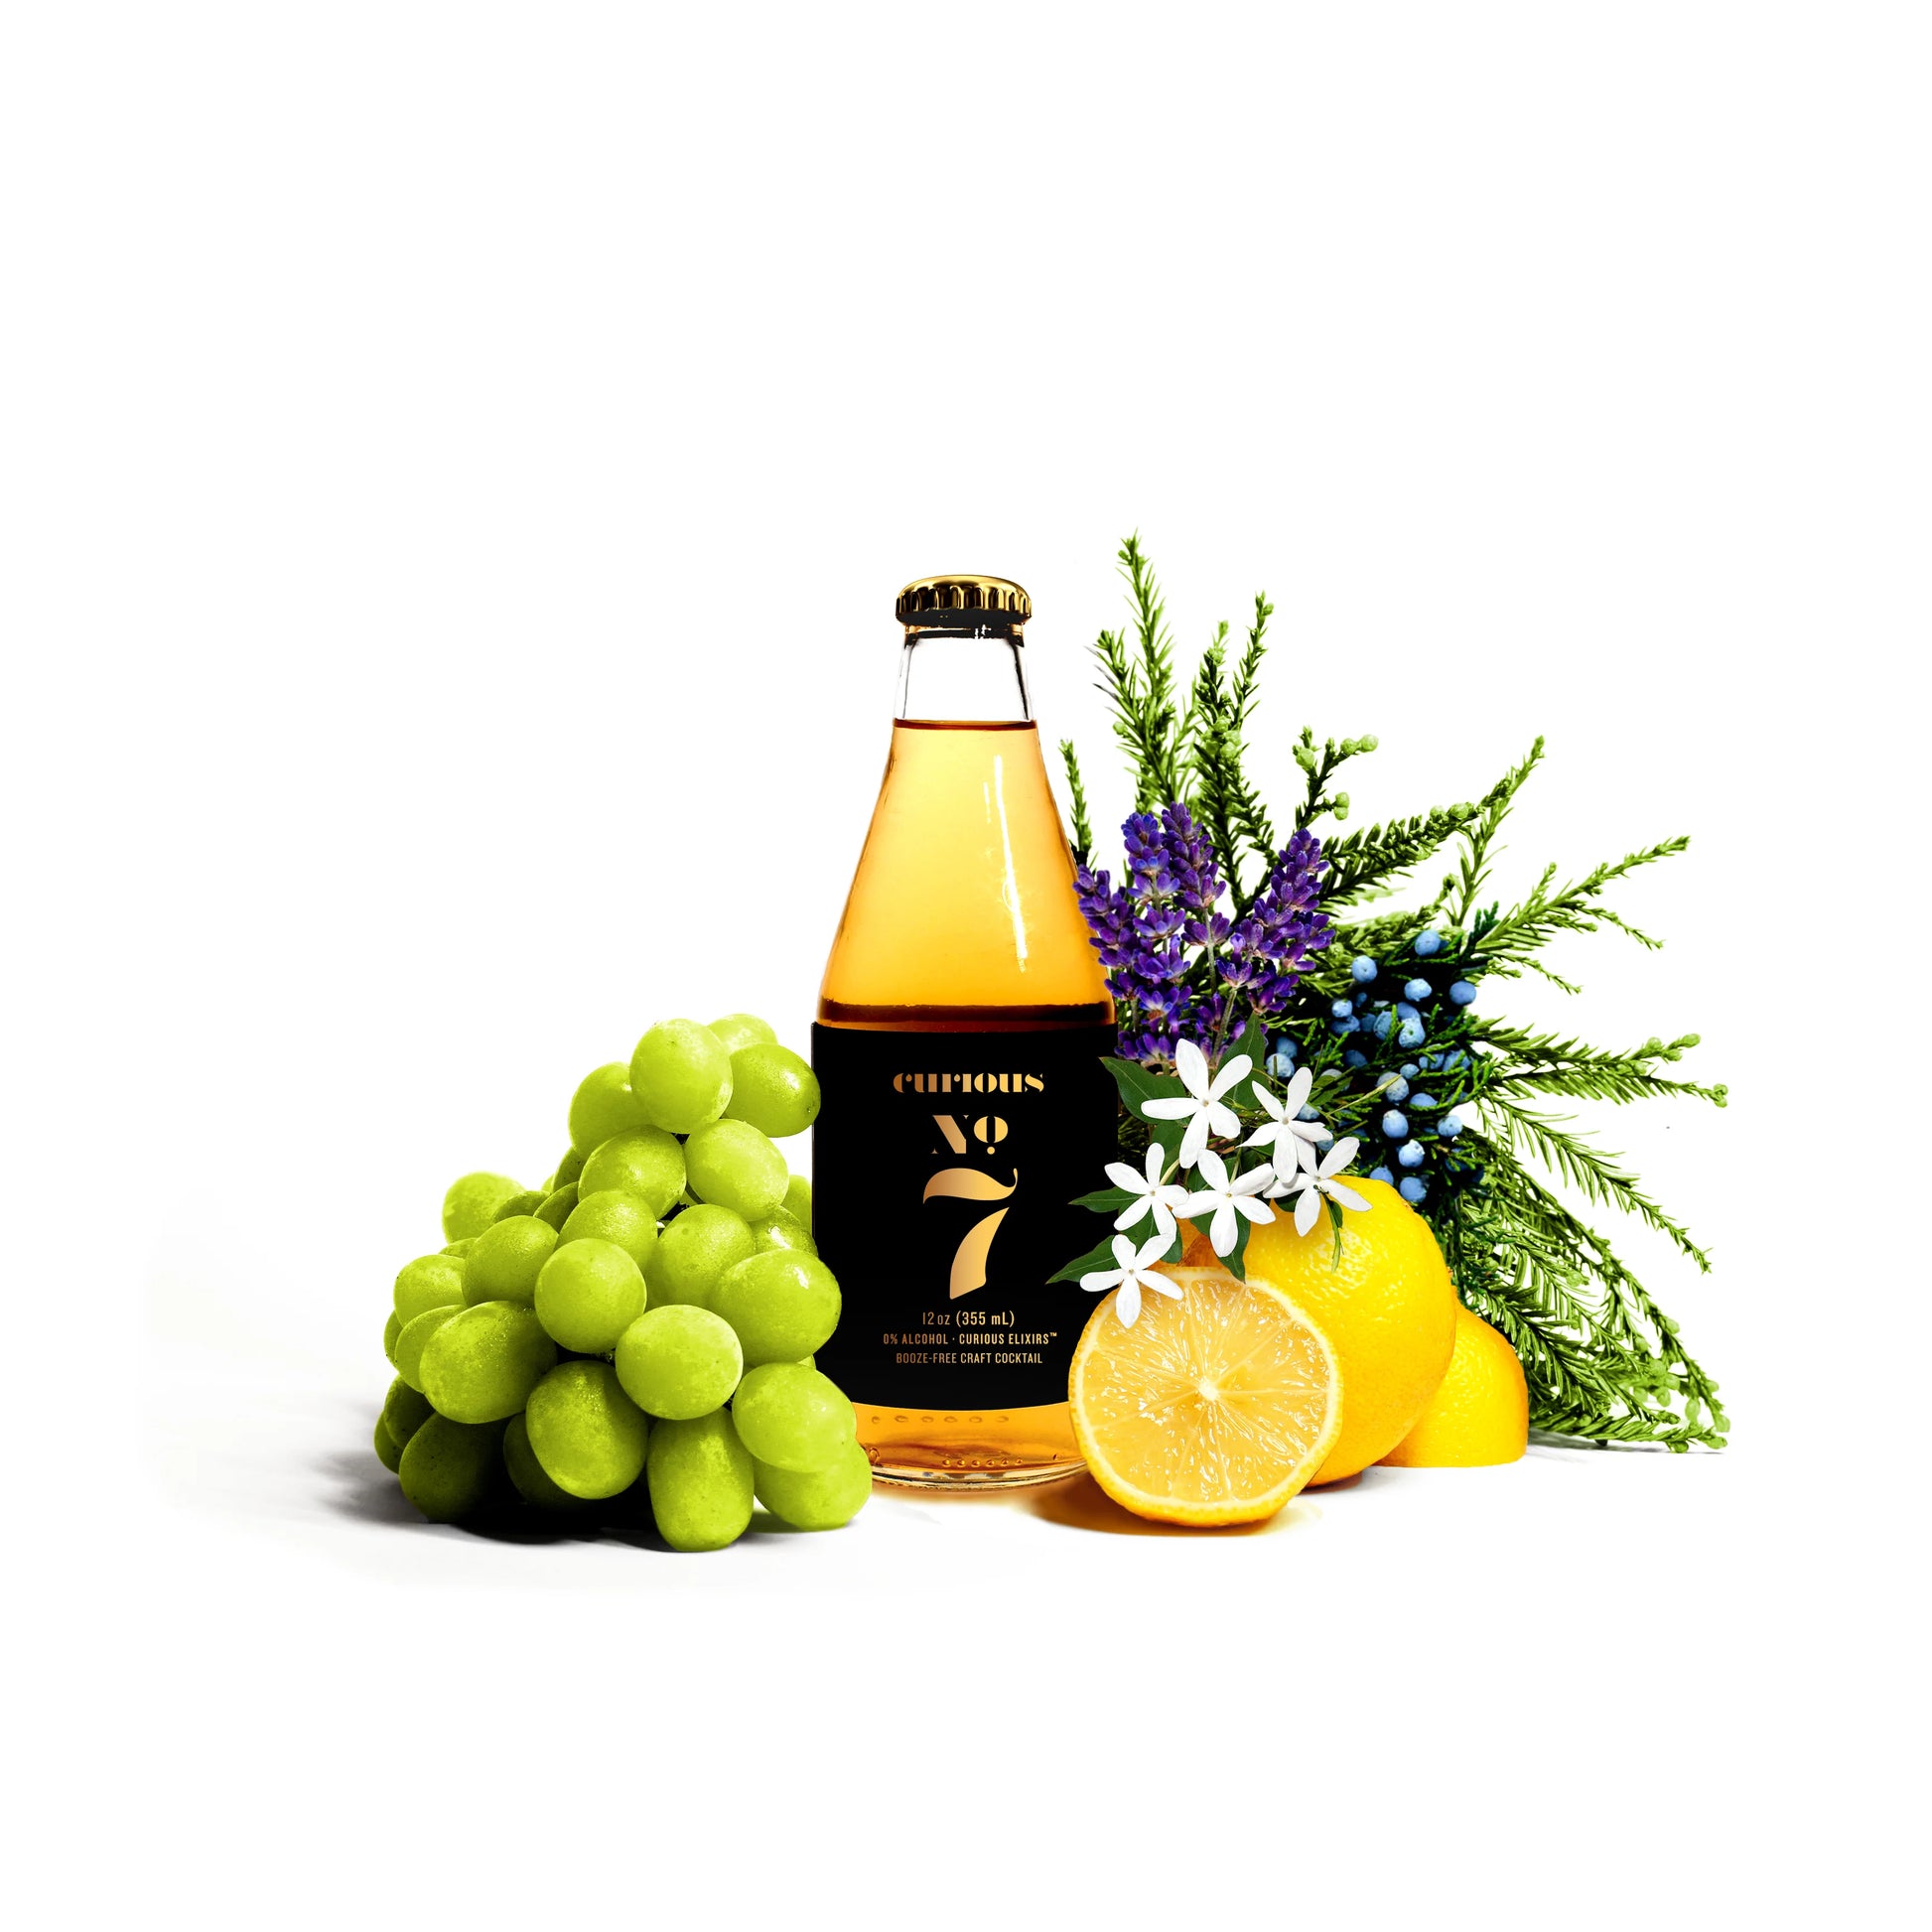 a bottle of curious no 7 surrounded by fruits and herbs